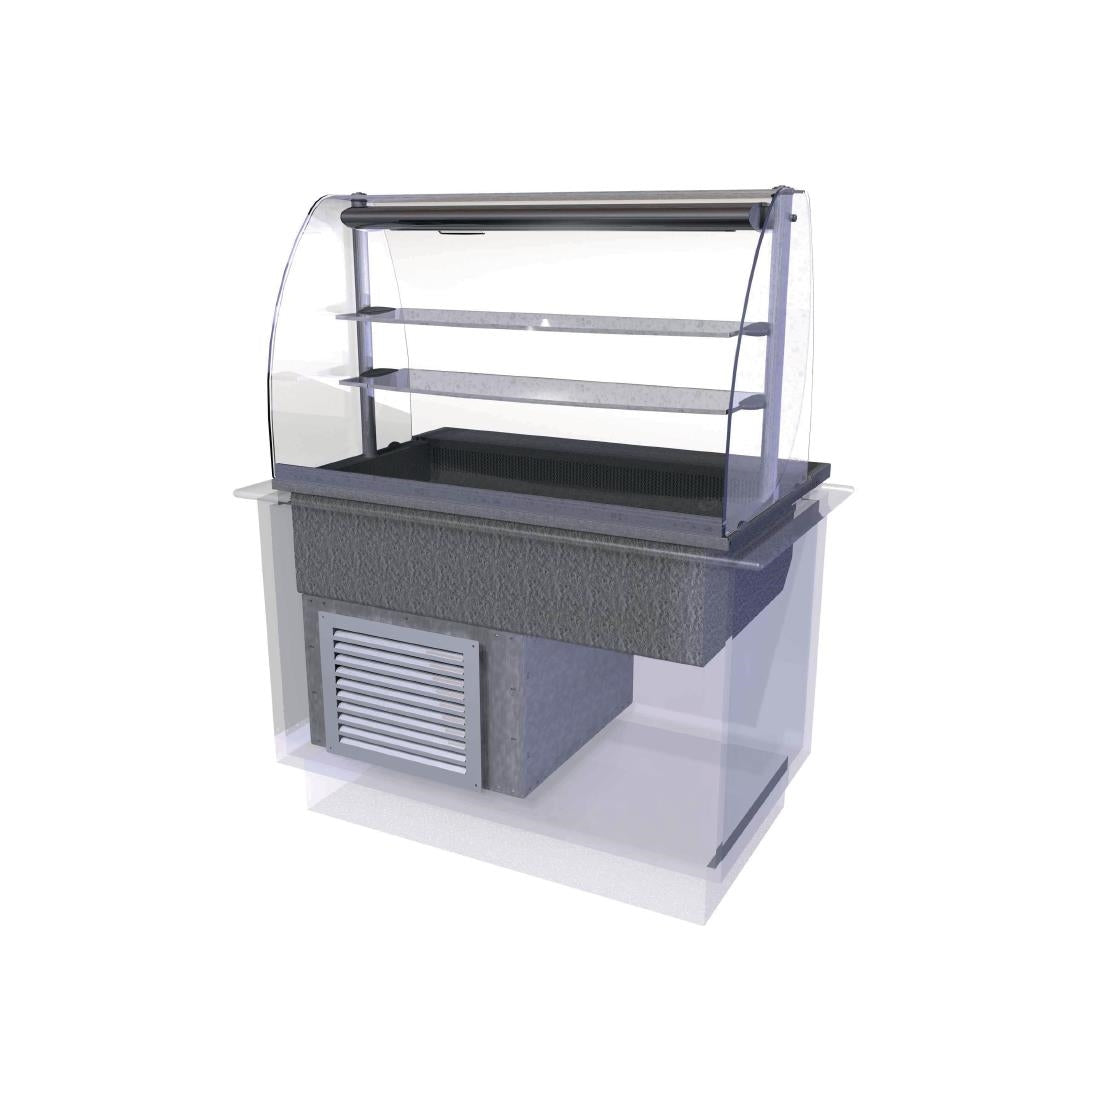 CW609 Designline Cold Multi Level Deli Assisted Service 1175mm JD Catering Equipment Solutions Ltd